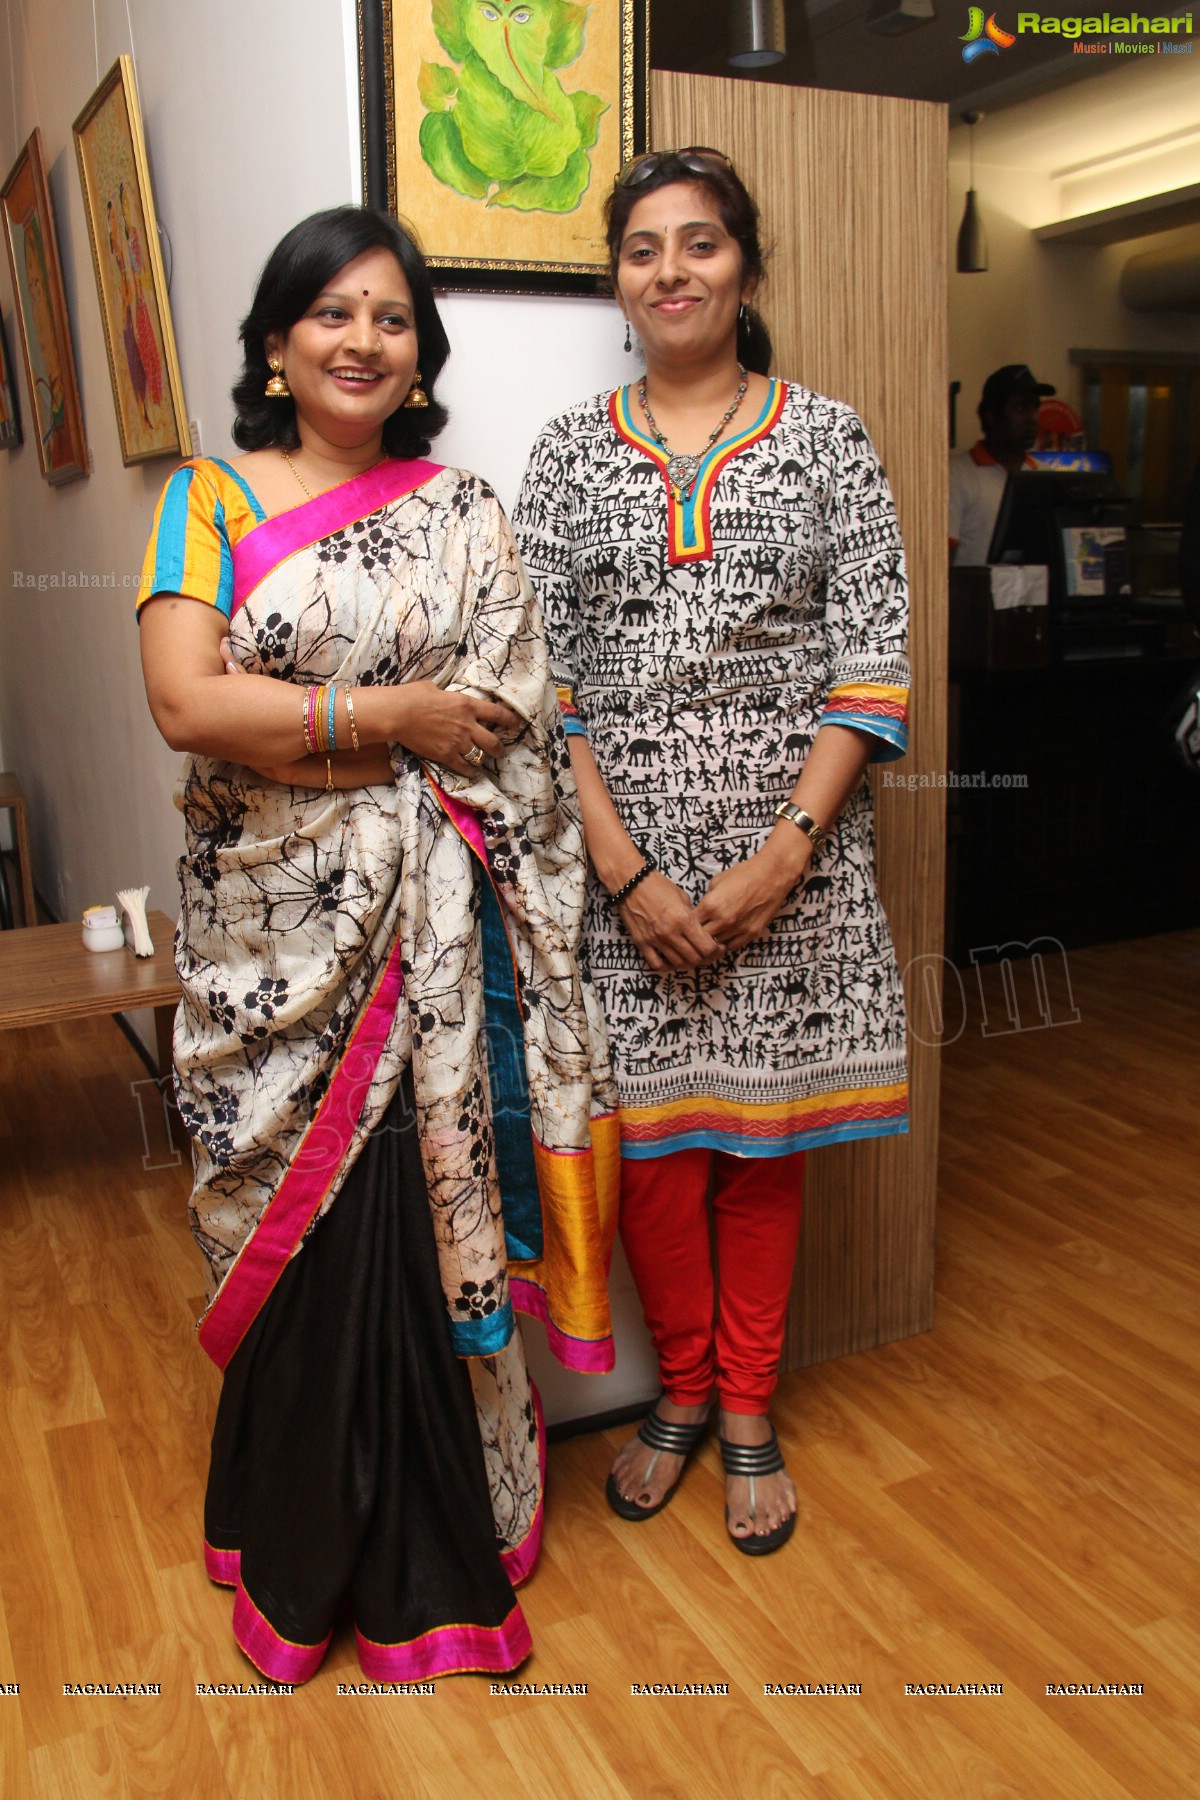 Colours on Canvas: Shalini Agarwal's Solo Art Exhibition at Beyond Coffee, Hyderabad